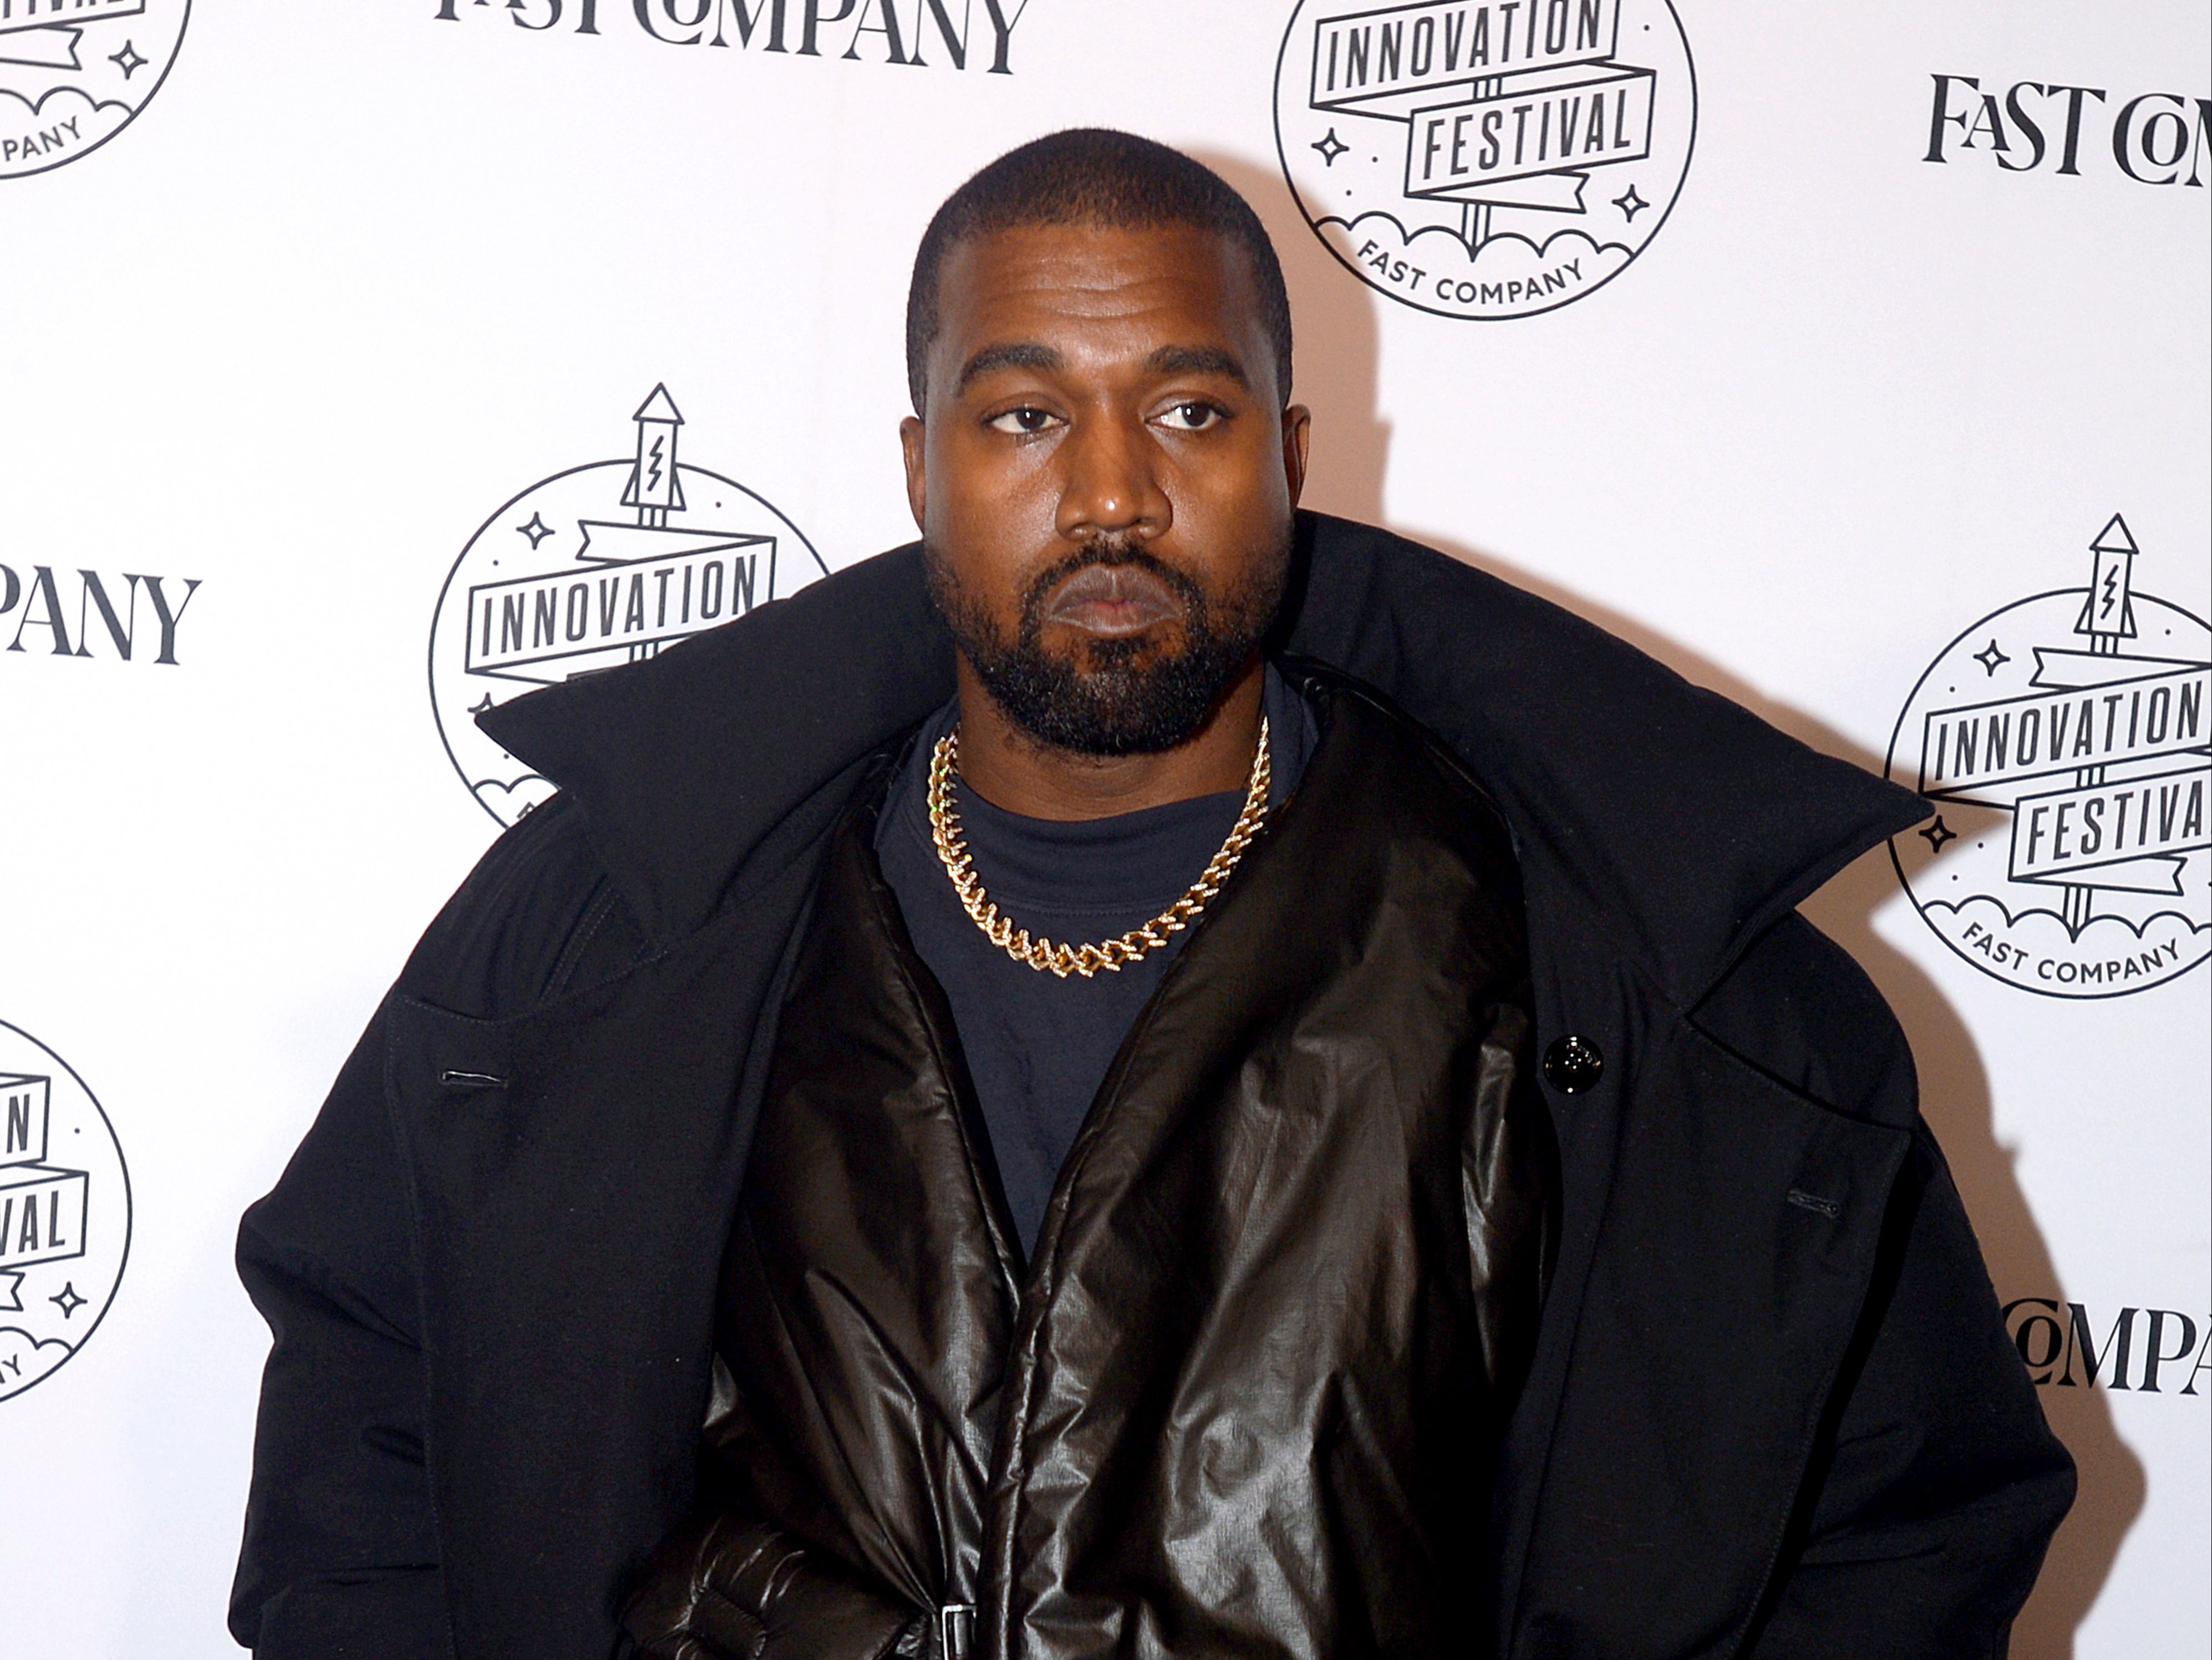 Kanye West loses billionaire status after Adidas ends Yeezy partnership,  according to Forbes